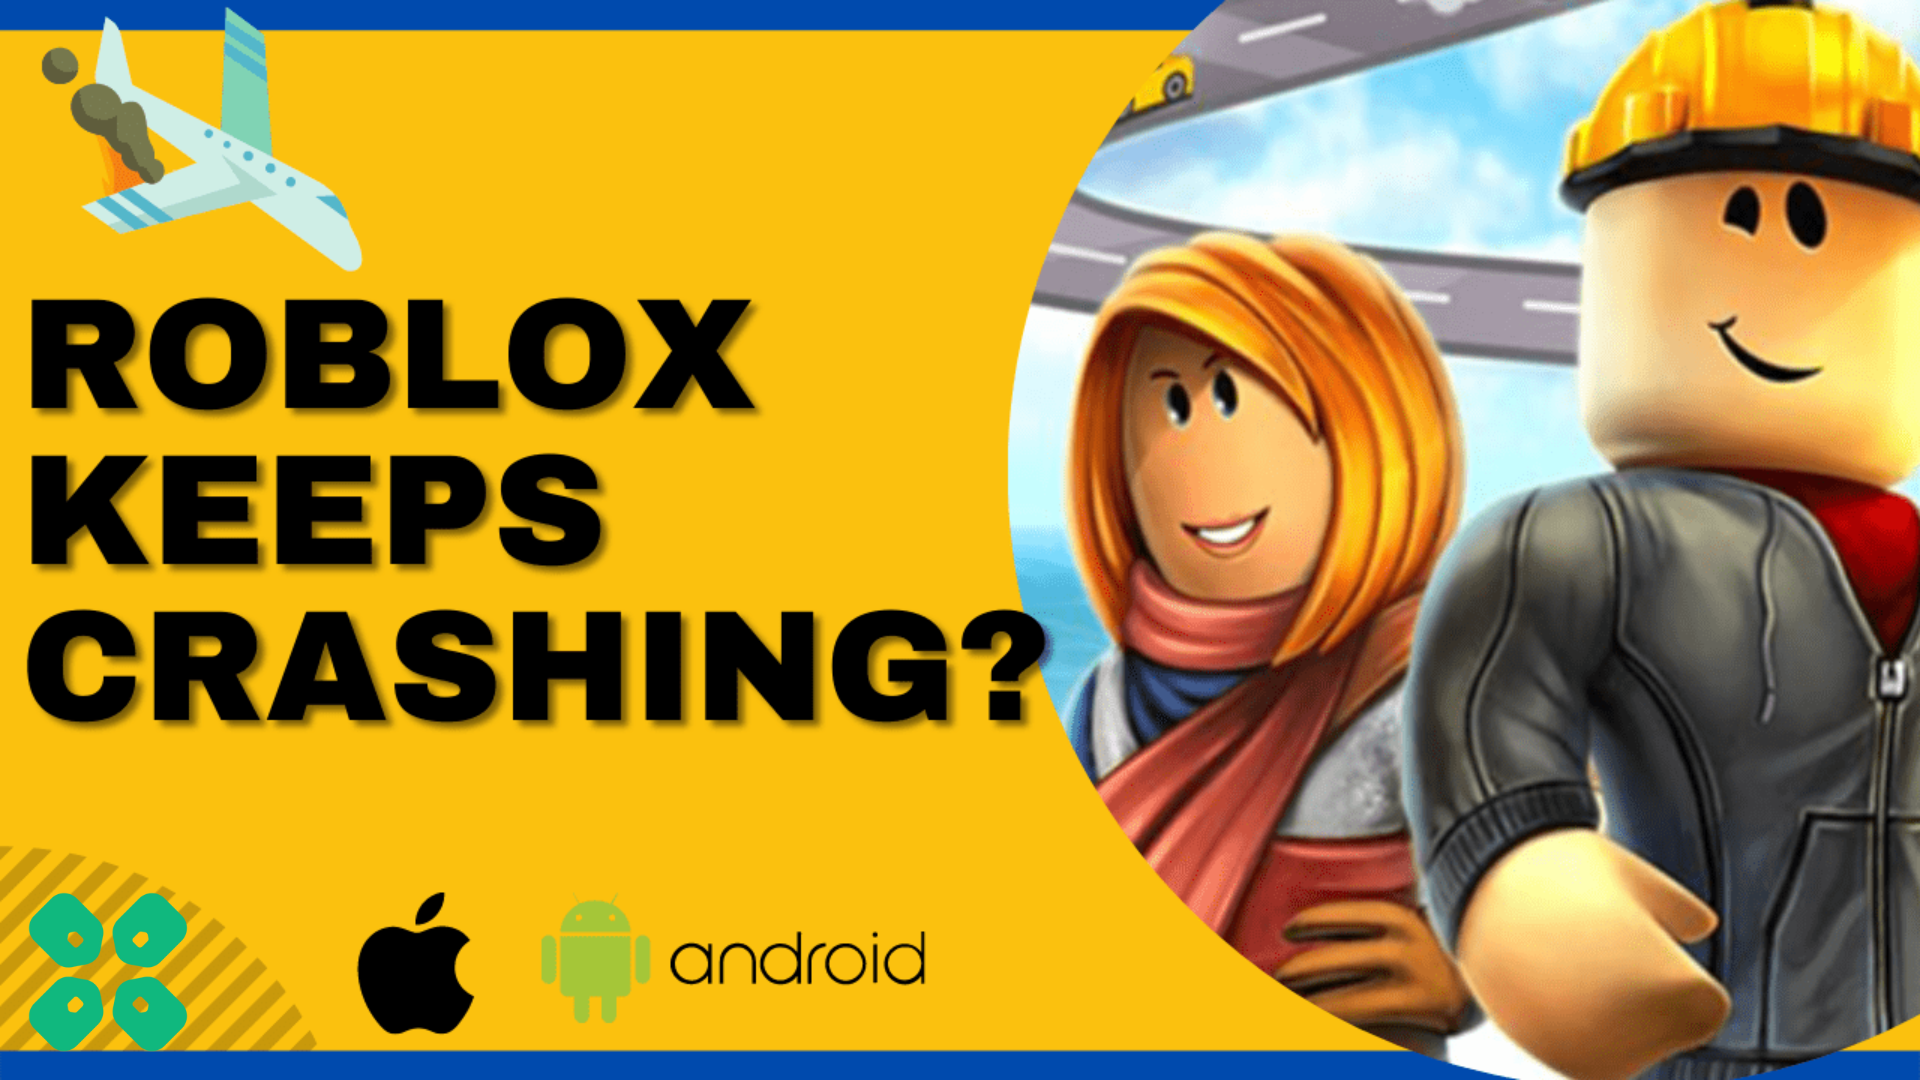 Roblox Keeps Crashing On Android! Here's How To Fix It